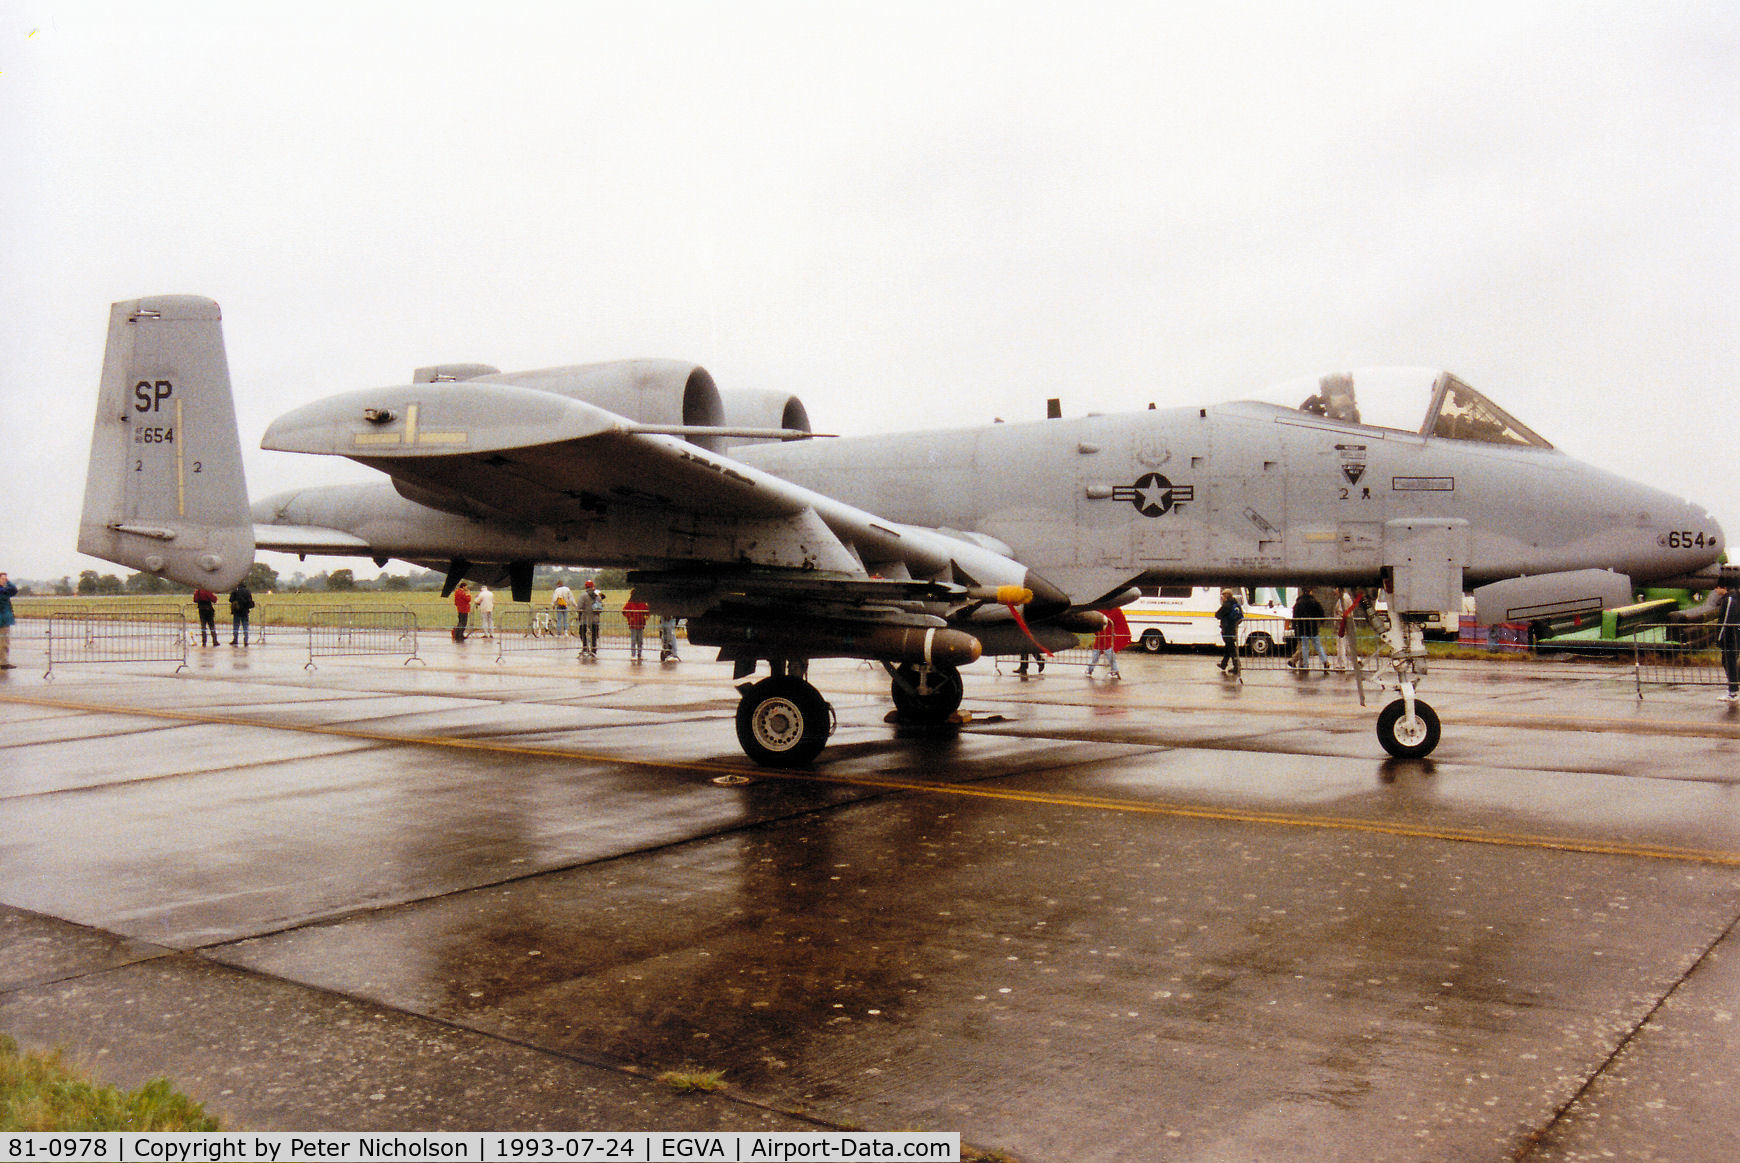 81-0978, 1981 Fairchild Republic A-10A Thunderbolt II C/N A10-0673, Another view of Hawg 01, the 510th Fighter Squadron A-10A Thunderbolt from Spangdahlem on display at the 1993 Intnl Air Tattoo at RAF Fairford.